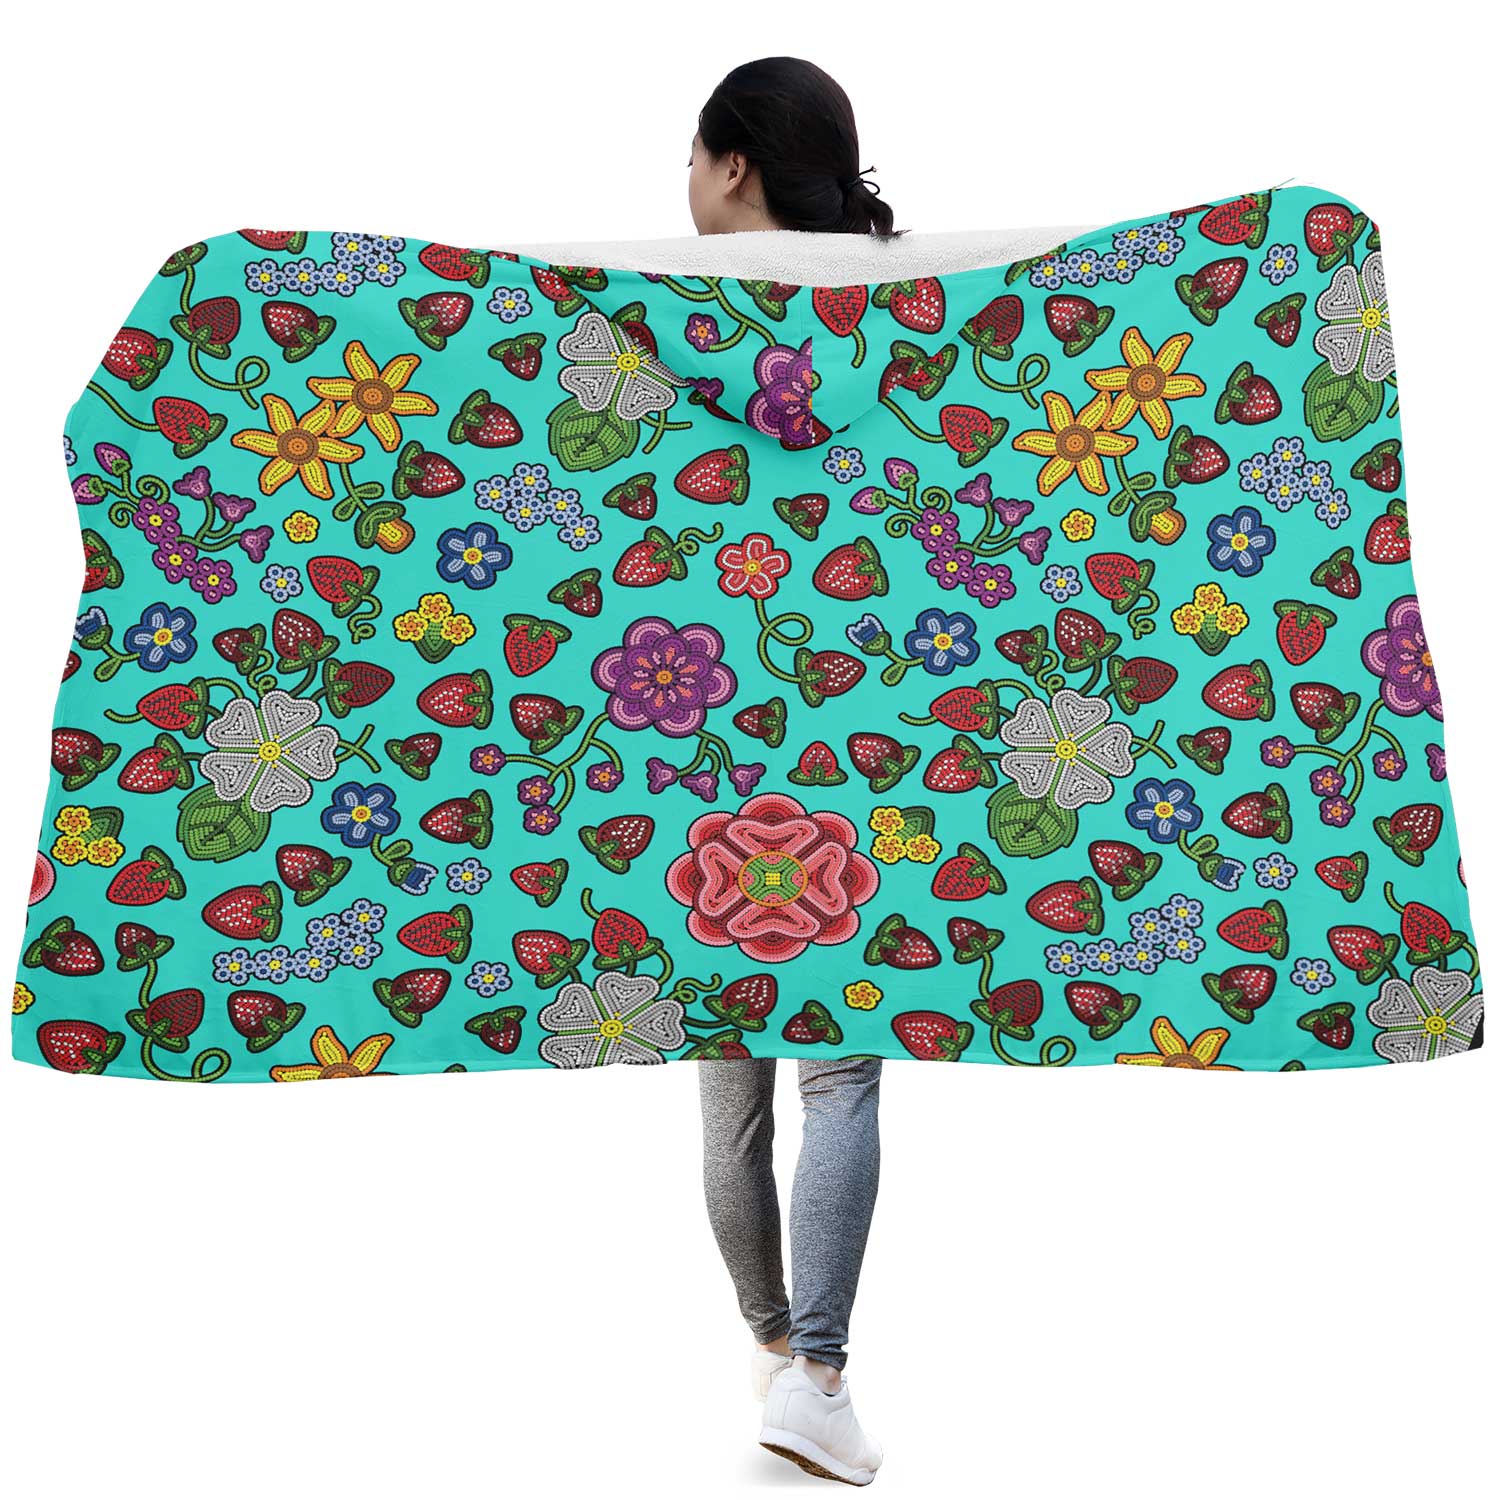 Berry Pop Turquoise Hooded Blanket